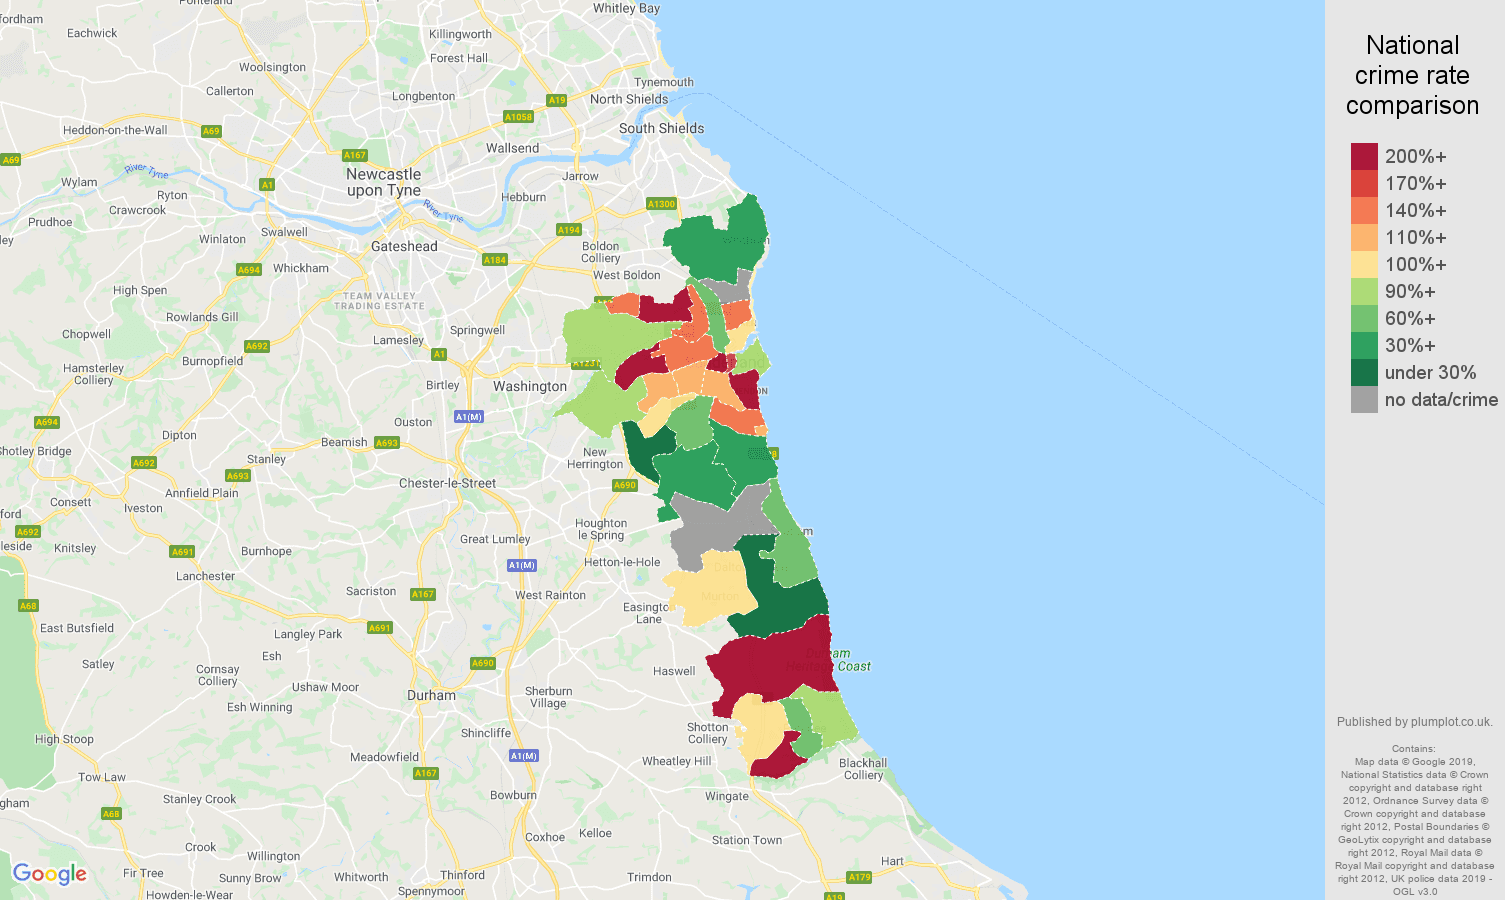 Sunderland possession of weapons crime rate comparison map